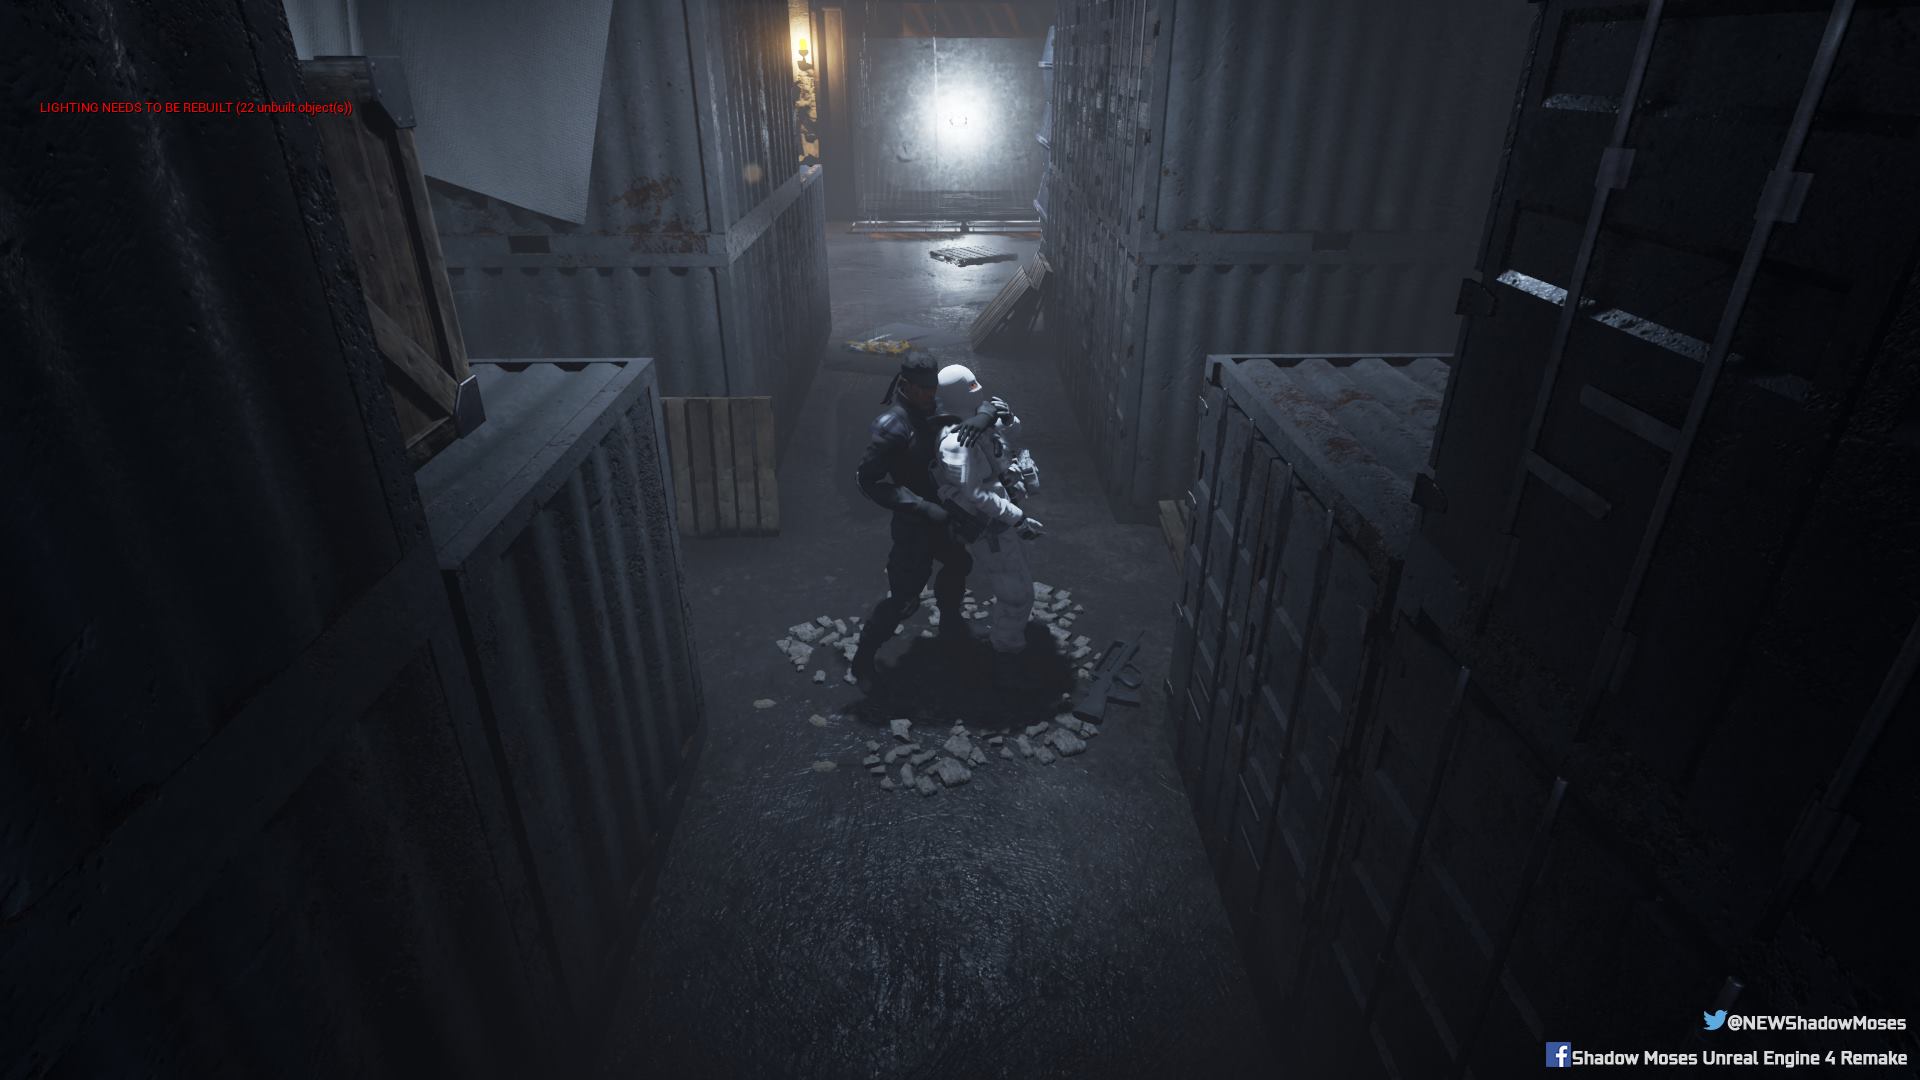 Metal Gear Solid Shadow Moses Remake In Unreal Engine 4